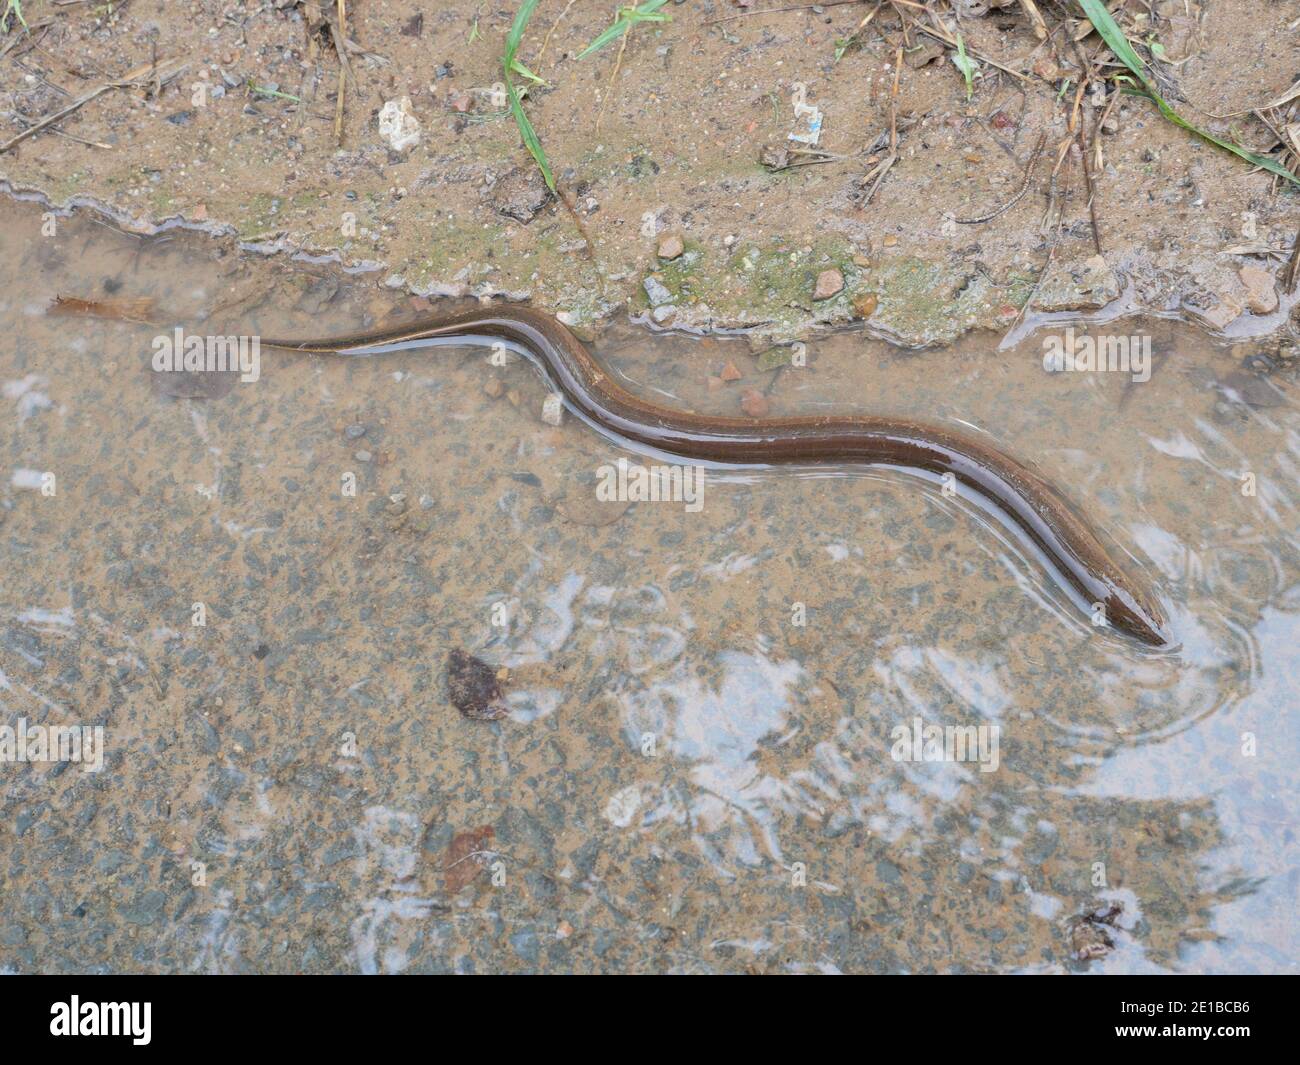 Eel in shallow water, A long fish like a snake on wet dirt land in Thailand Stock Photo